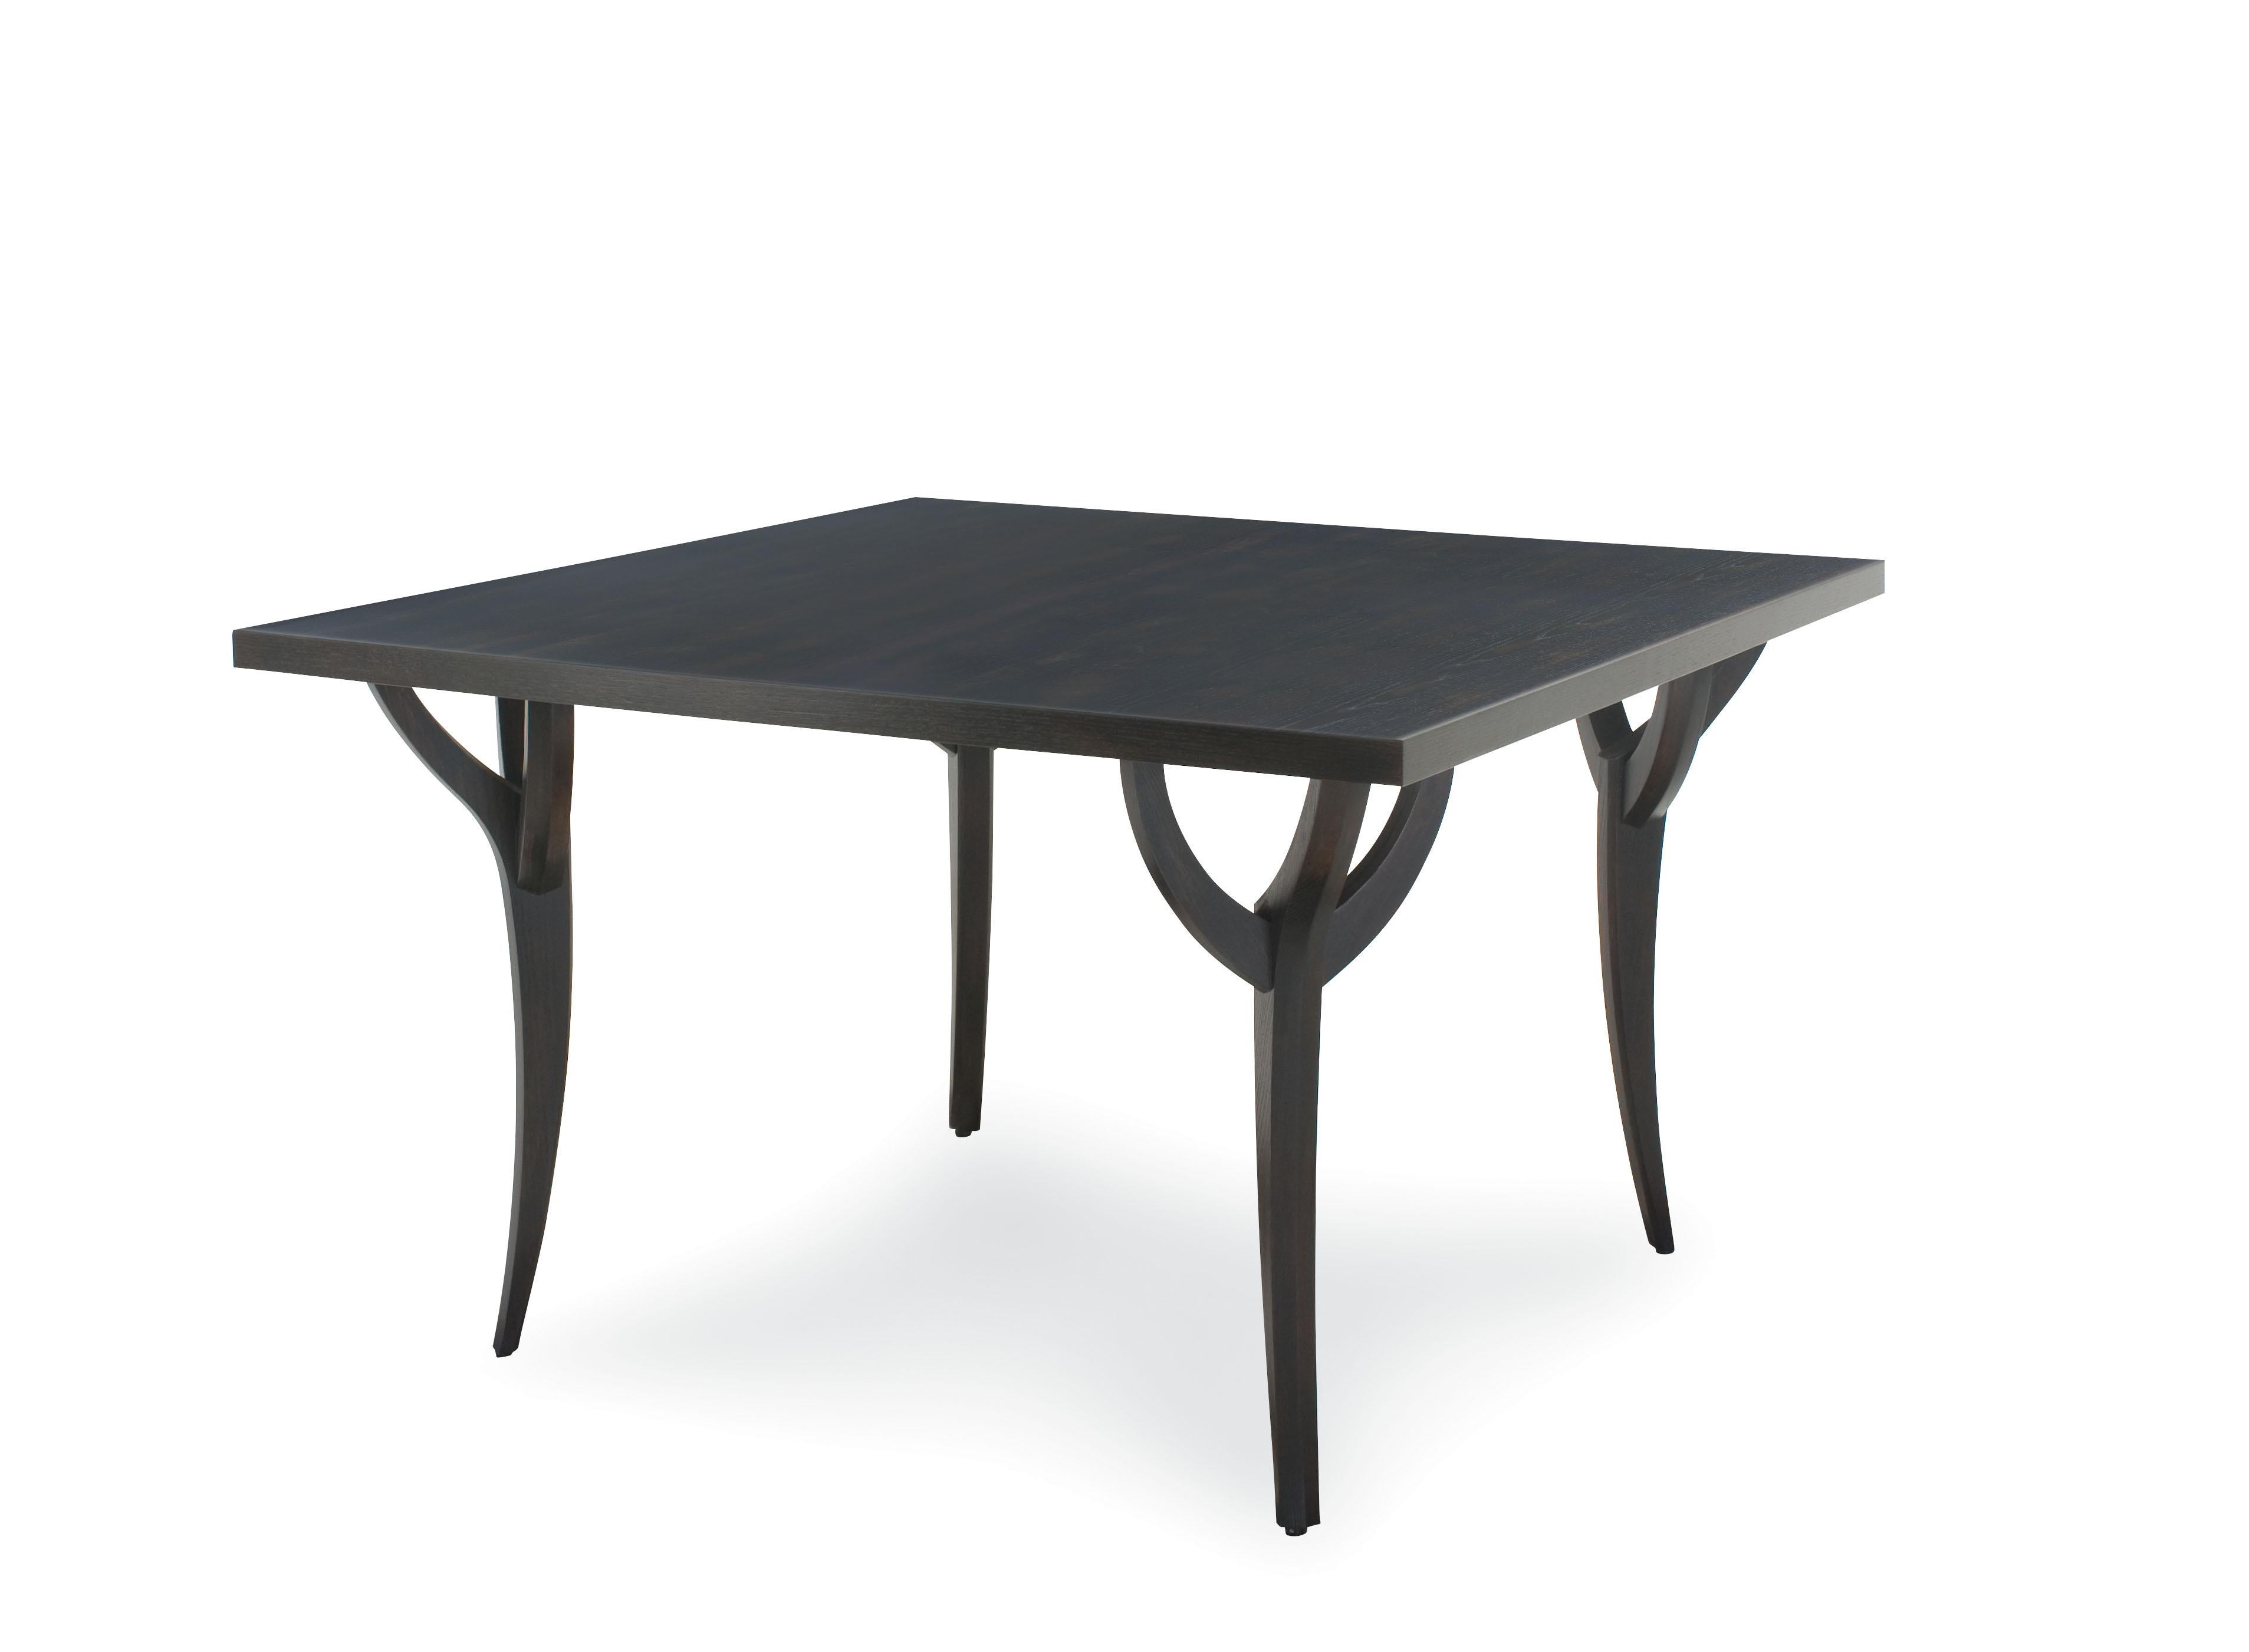 This pair of black branch dining tables are designed by Juan Montoya. The beautiful piece is made of ash solids and veneer. The table is composed of black wood tabletop that is supported by some branch like wooden legs. The dining table was part of